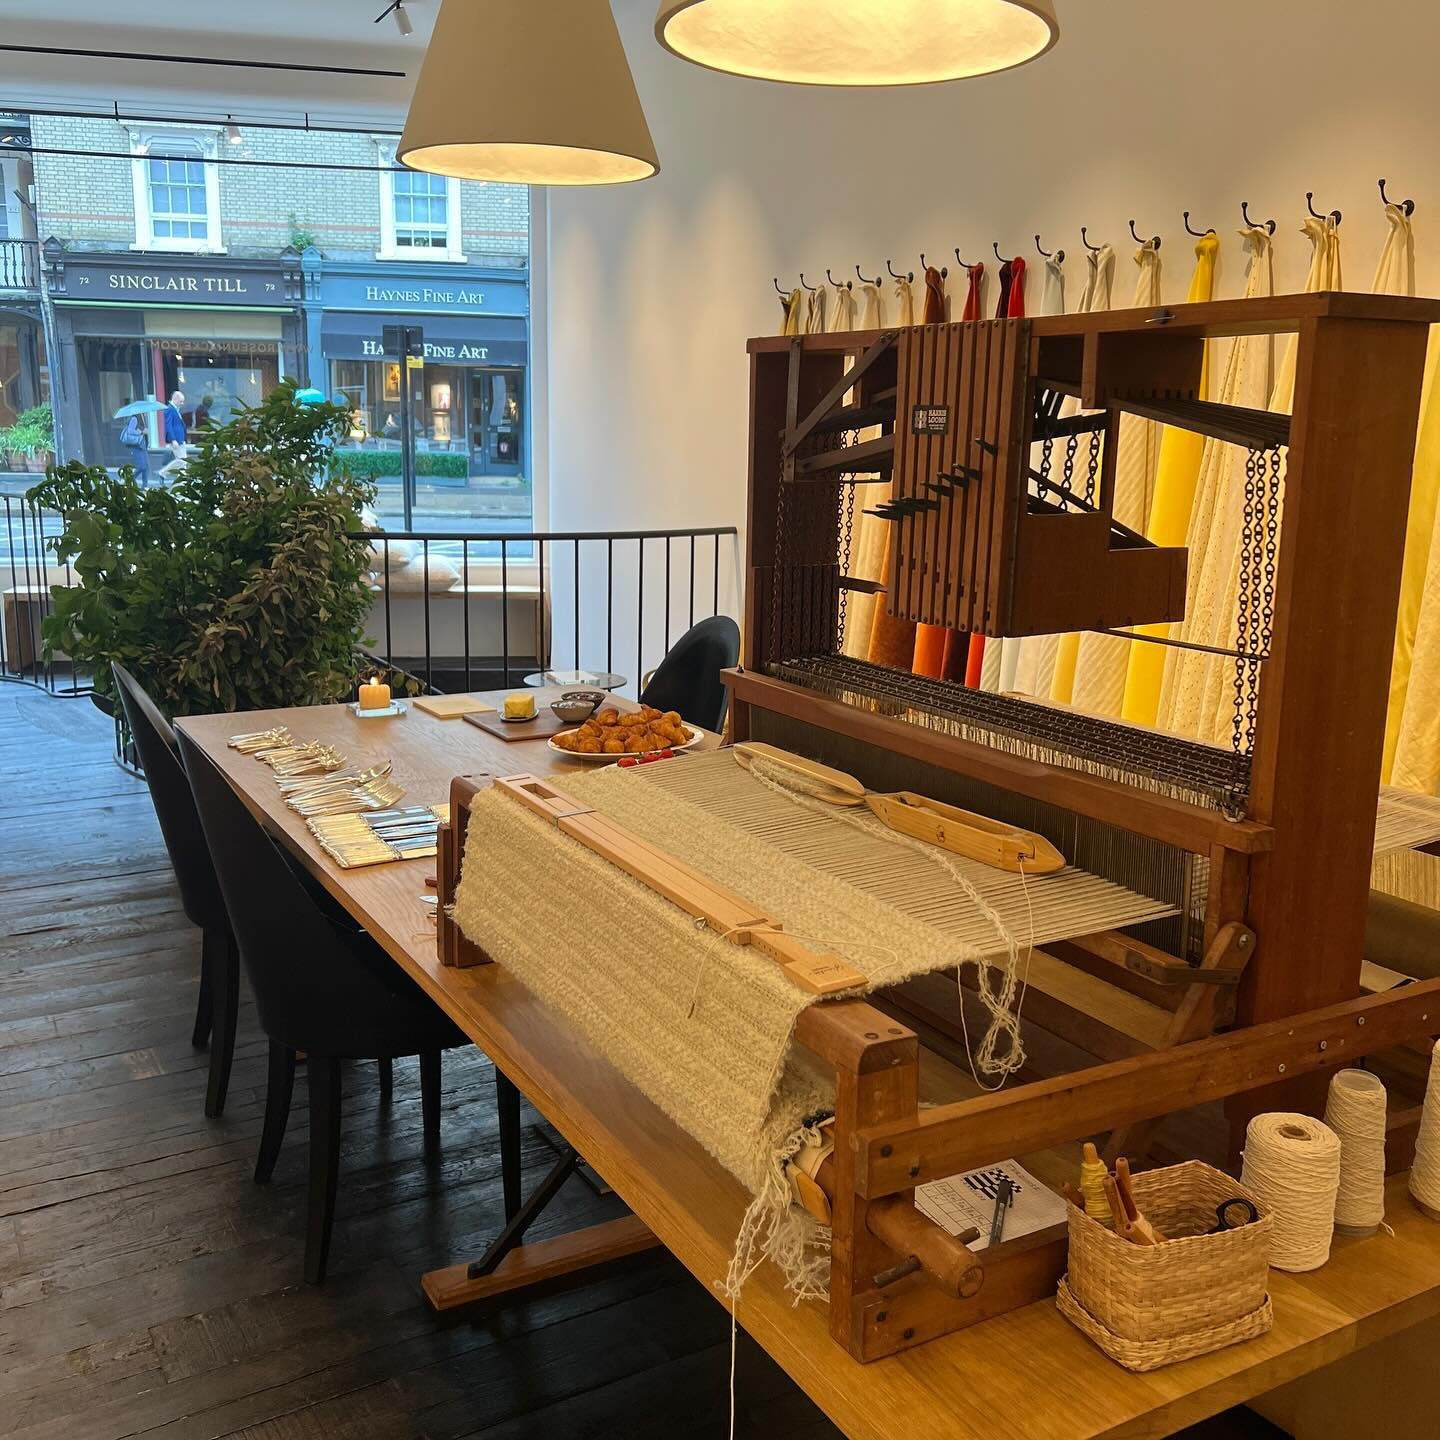 Day one of our week long residency at Rose Uniacke - such a wonderful space to be in. 

We will be at the Pimlico Road shop for the rest of the week as follows: 

Weds: 12-8pm 
Thurs: 10am-5pm
Fri: 10am-5pm
Sat: 10am-4pm